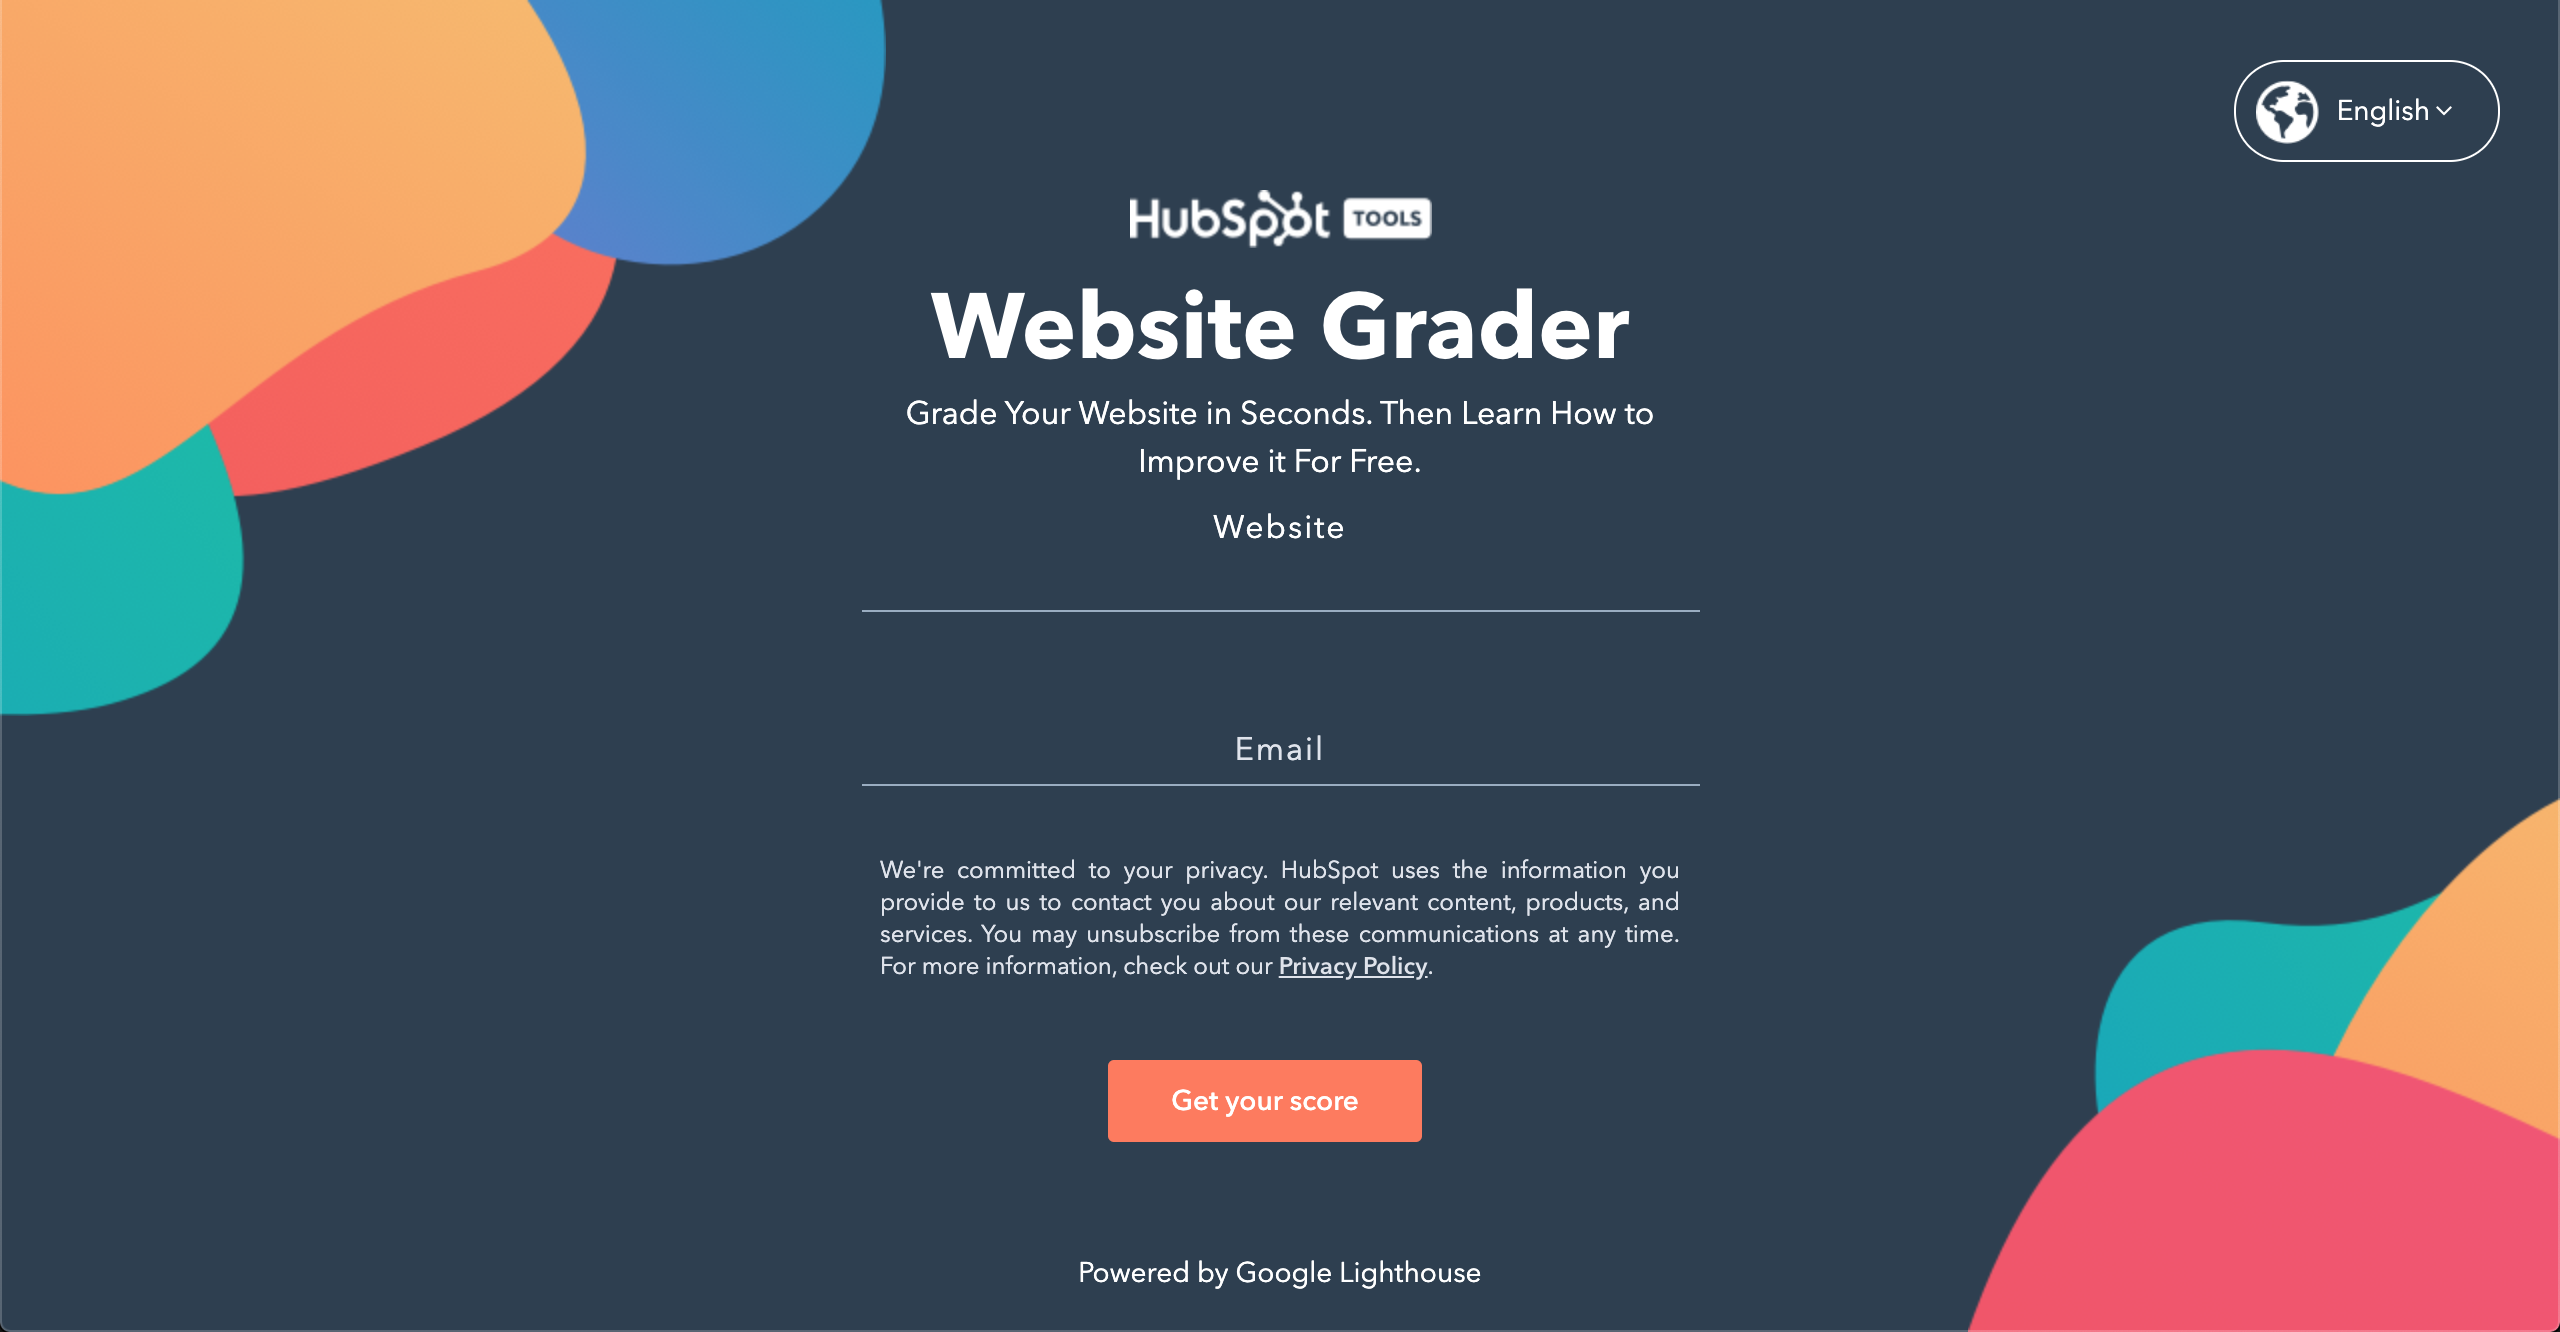 A great tool to grade your website in seconds for free